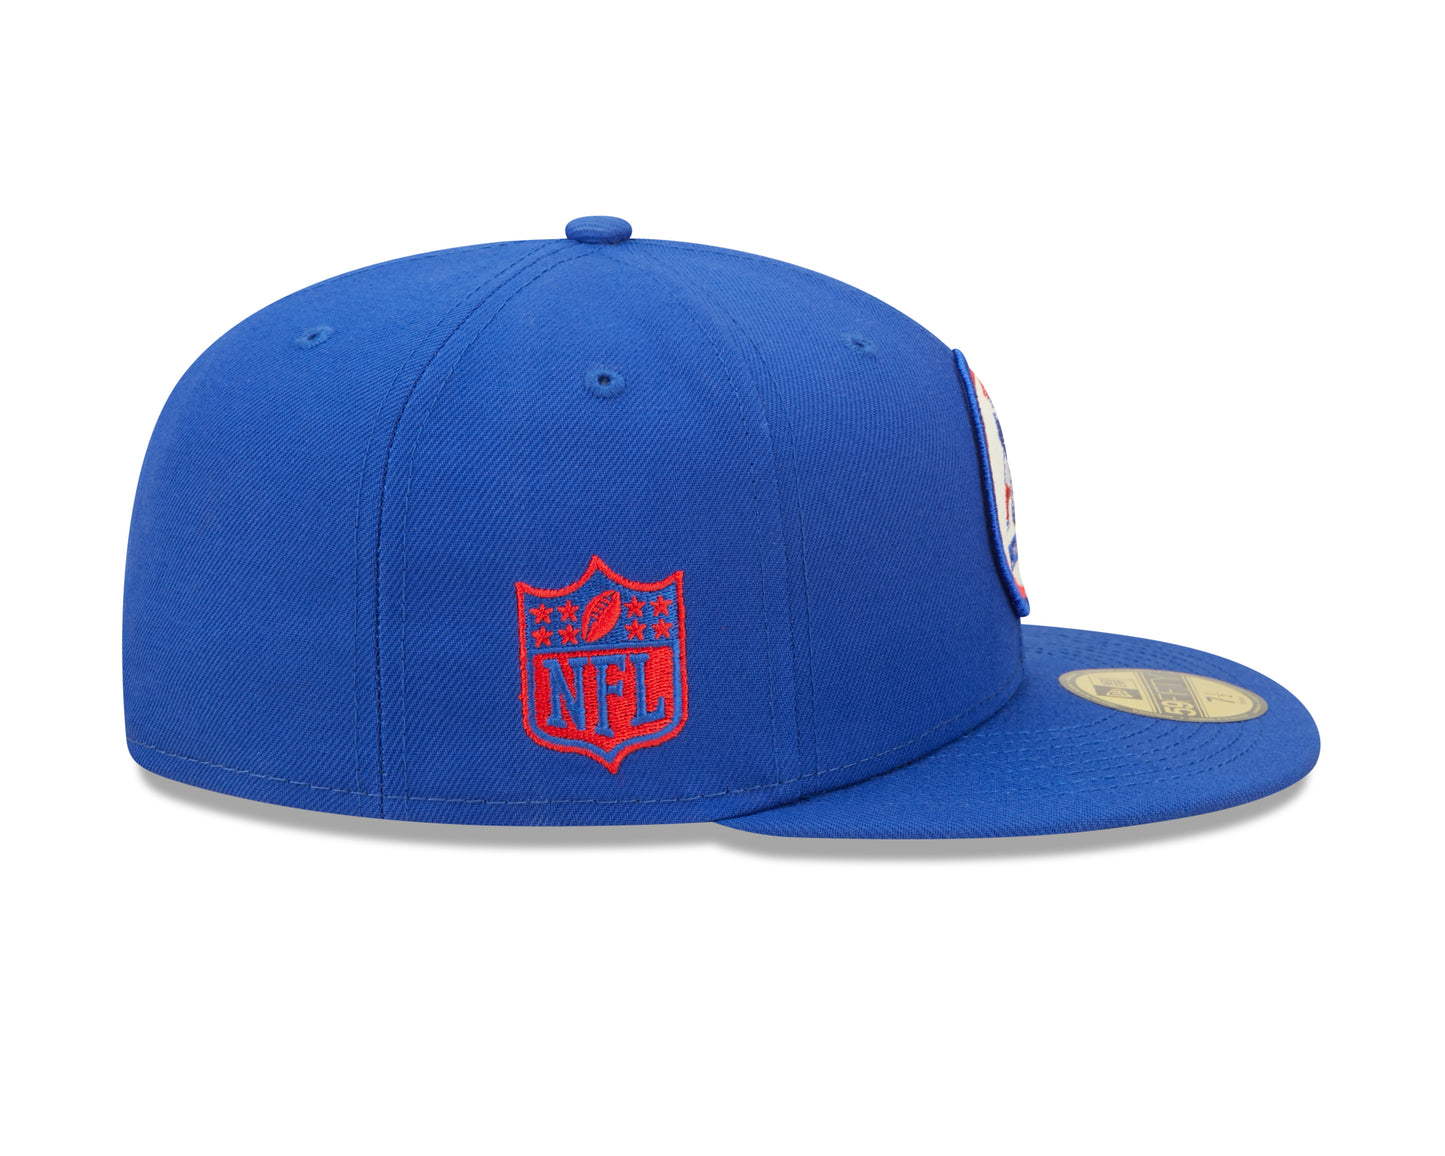 New England Patriots New Era Sideline 59FIFTY Historic Fitted Hat-Blue